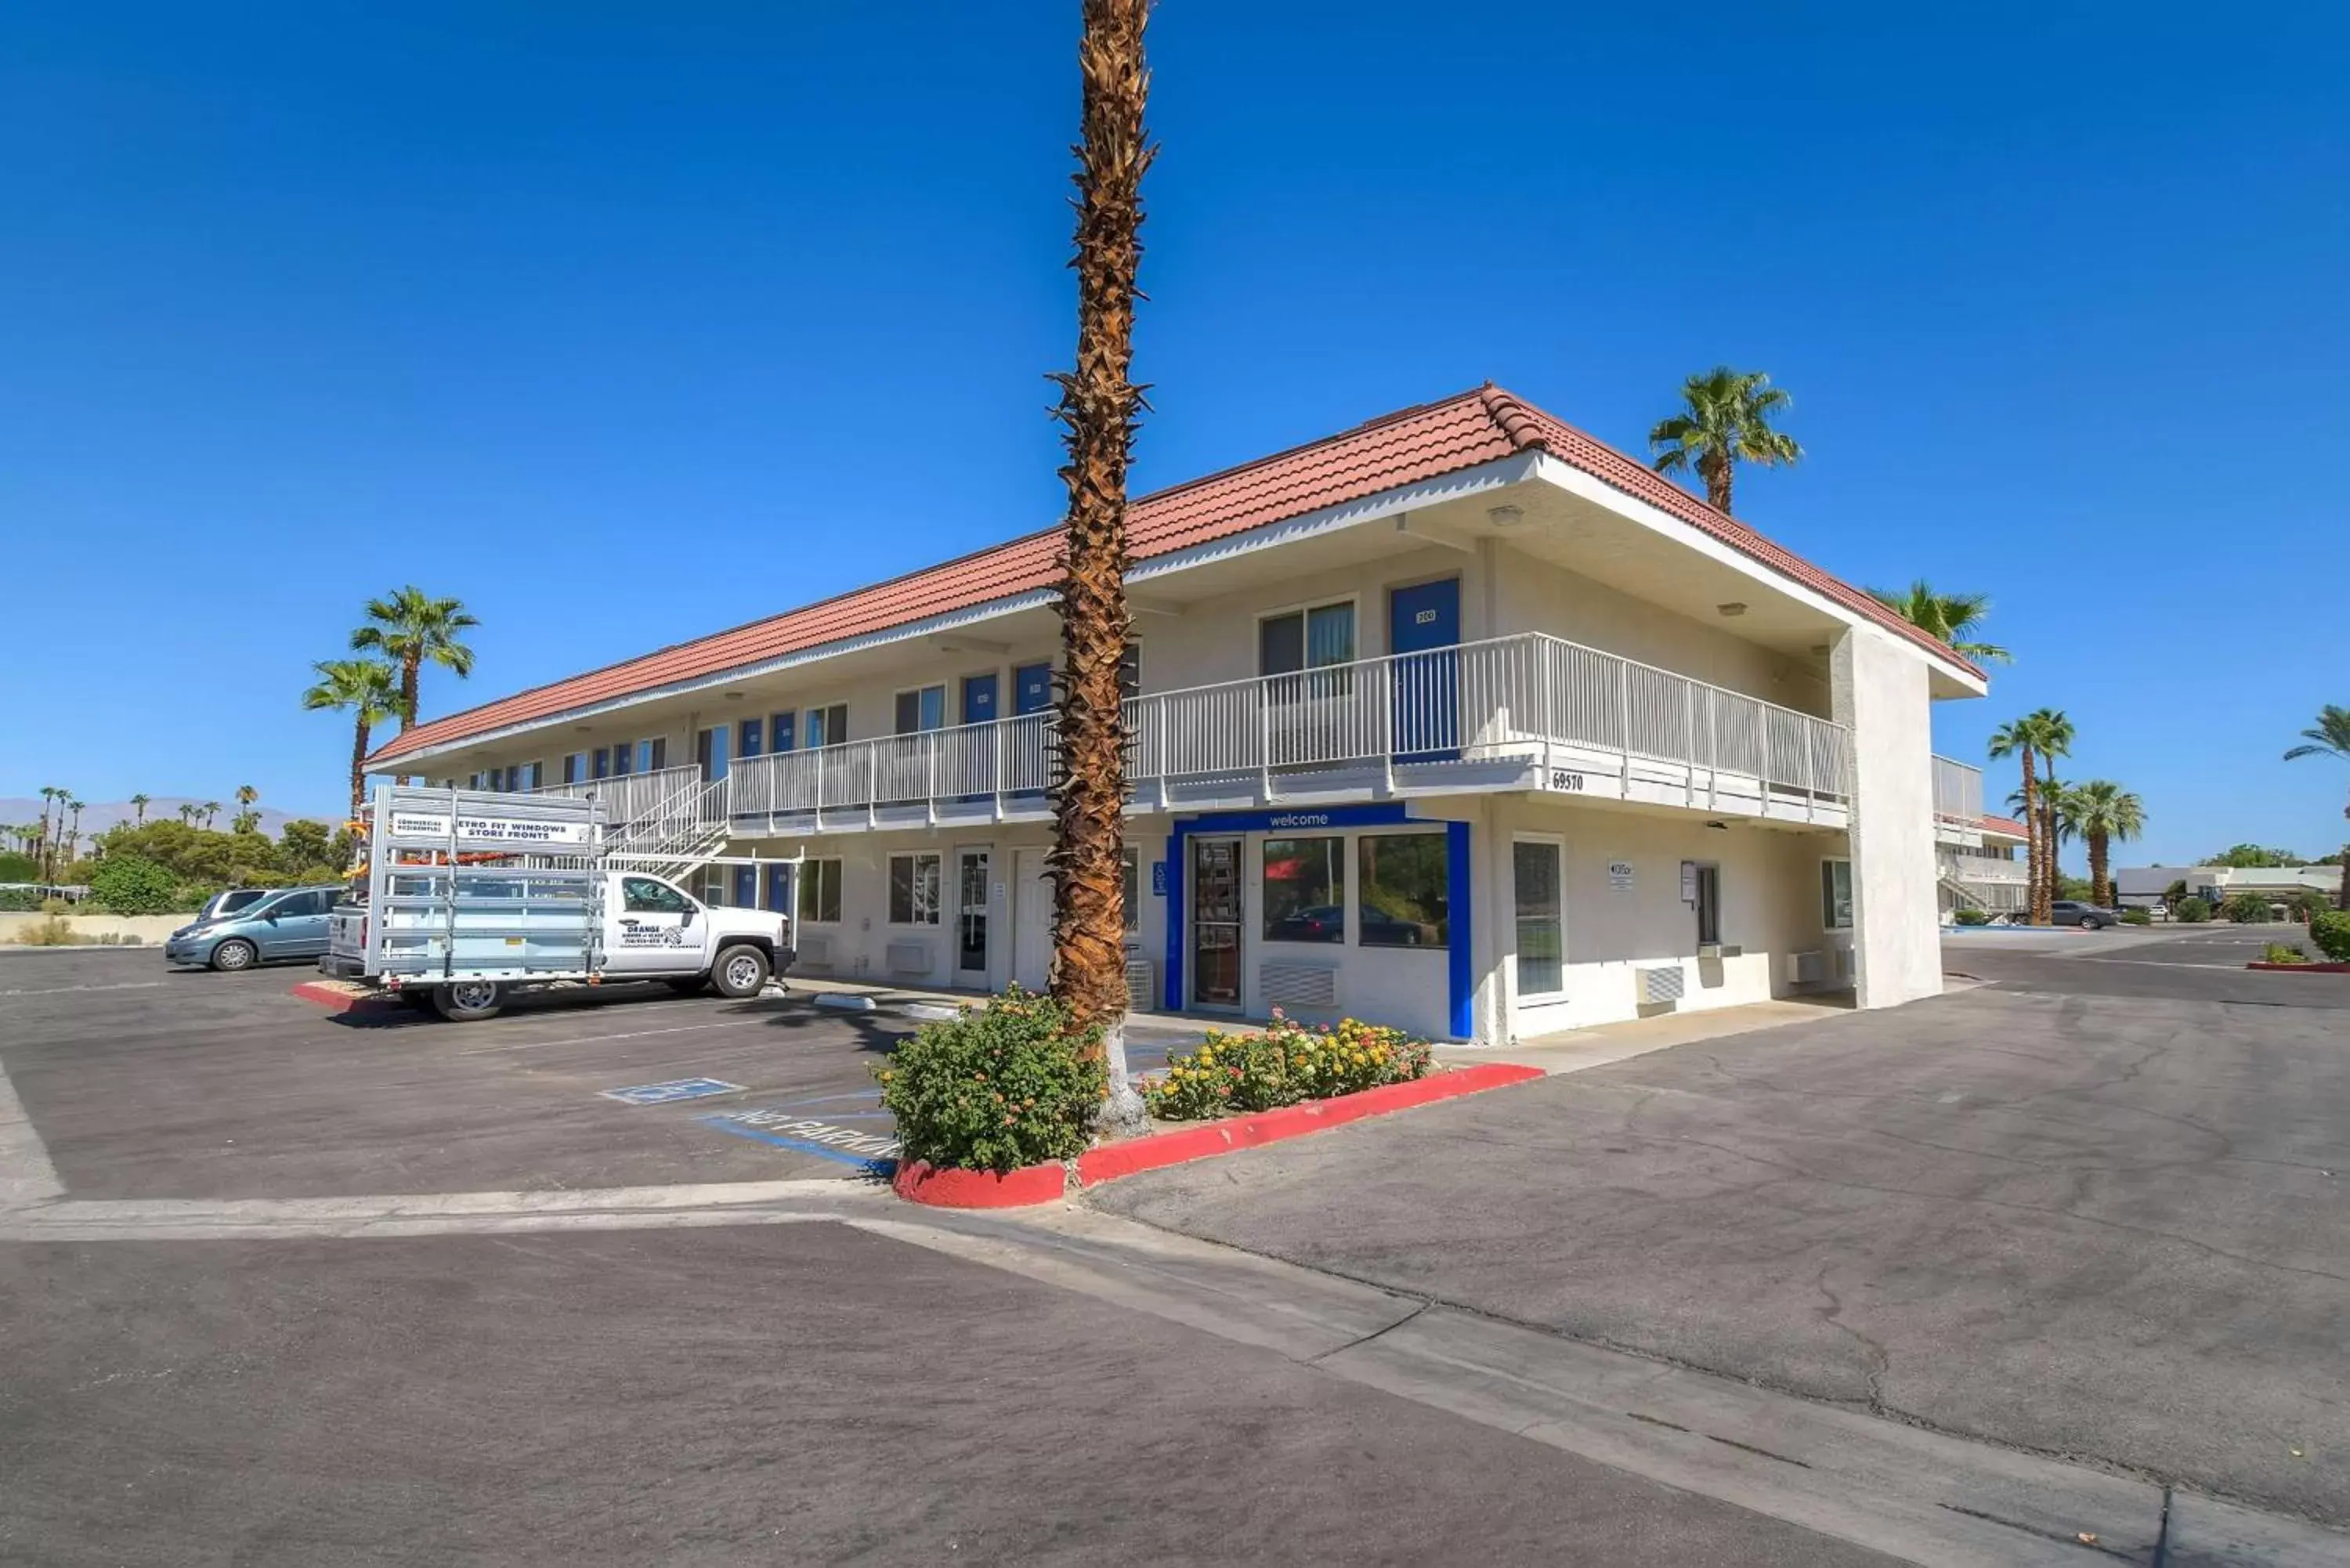 Property Building in Motel 6-Rancho Mirage, CA - Palm Springs